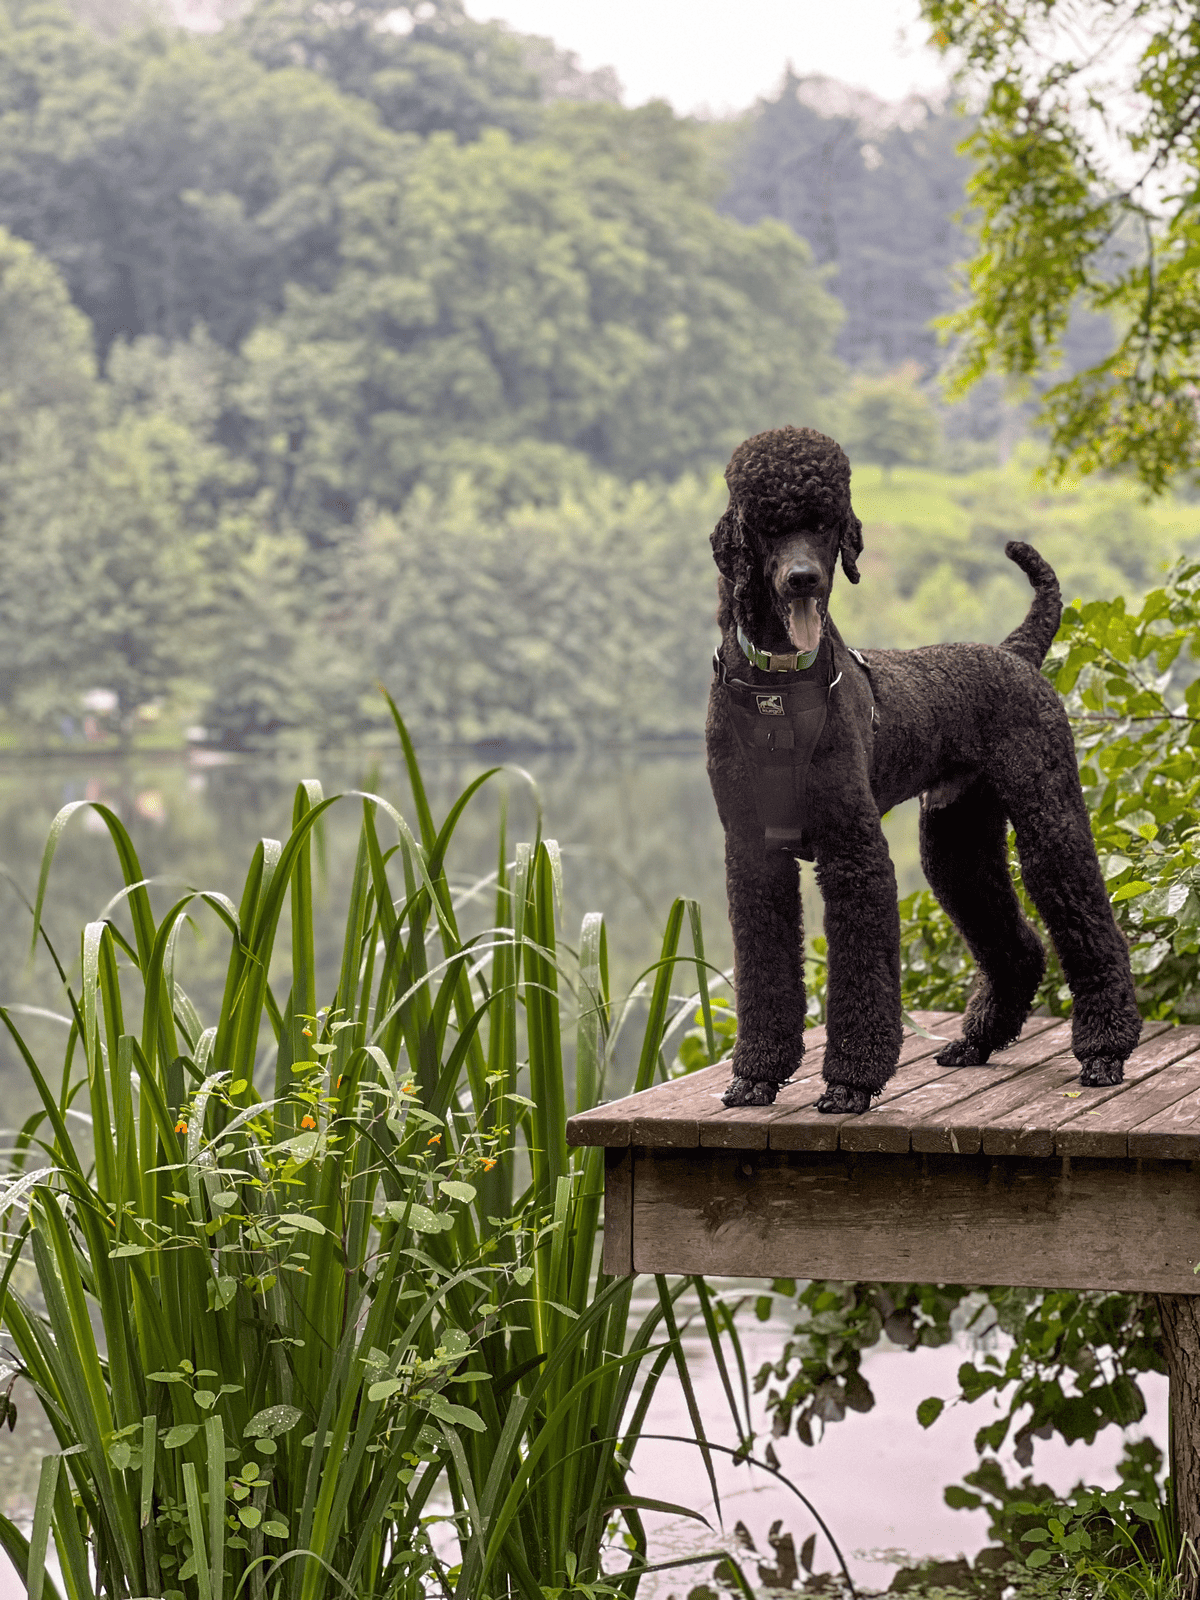 Portrait of Philip the blue standard poodle on the dock of lake surrounded by plants, trees and greenery.